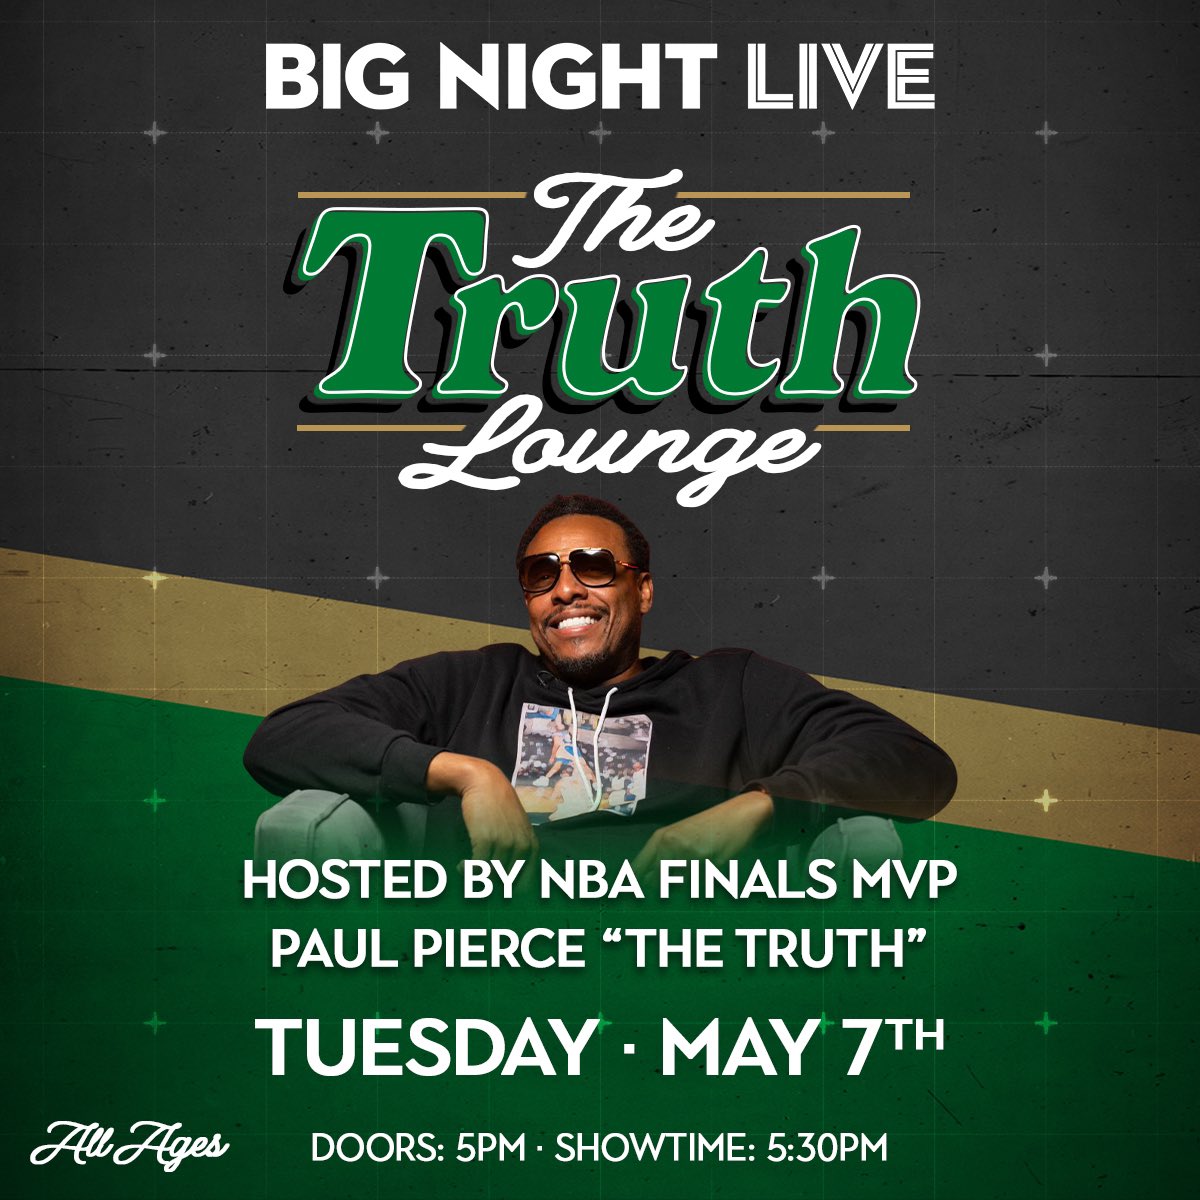 THE TRUTH IS LIVE IN BOSTON TOMORROW ☘️ Don’t miss your chance to catch @paulpierce34 live at @bignightlive on 5/7 at 5:30pm. Get your tickets here: ticketmaster.com/event/010060A1…